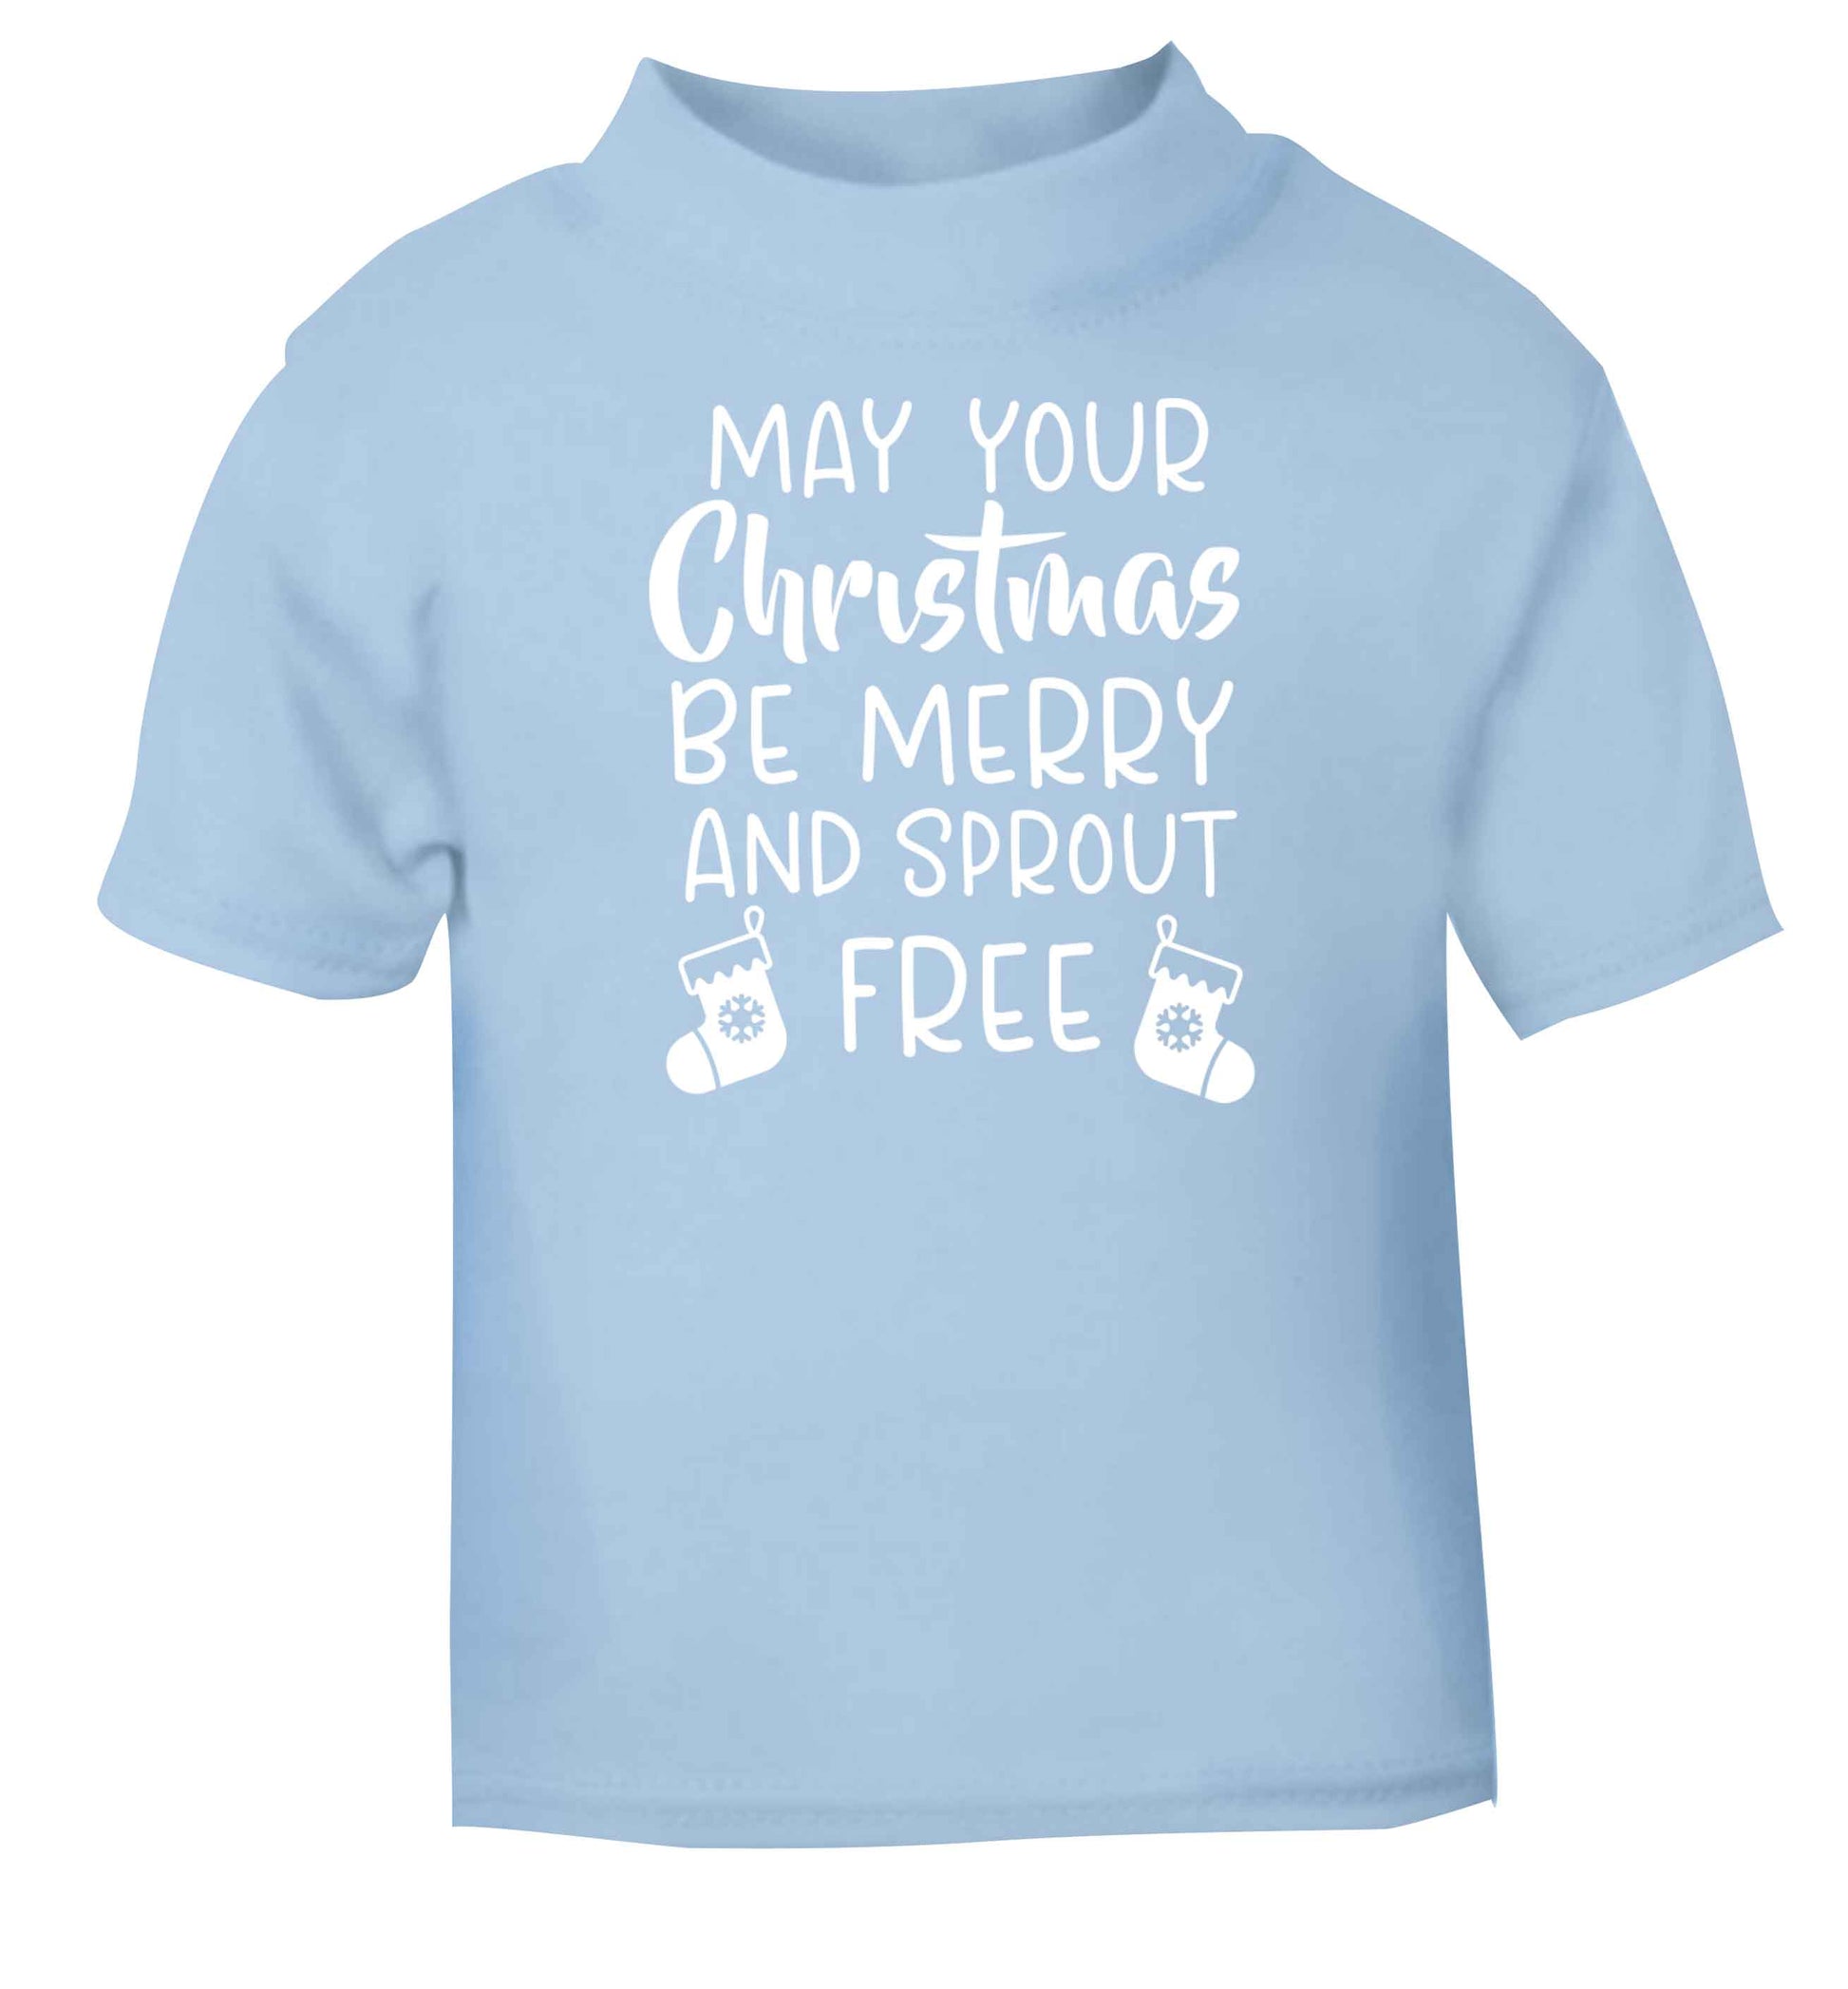 May your Christmas be merry and sprout free light blue baby toddler Tshirt 2 Years